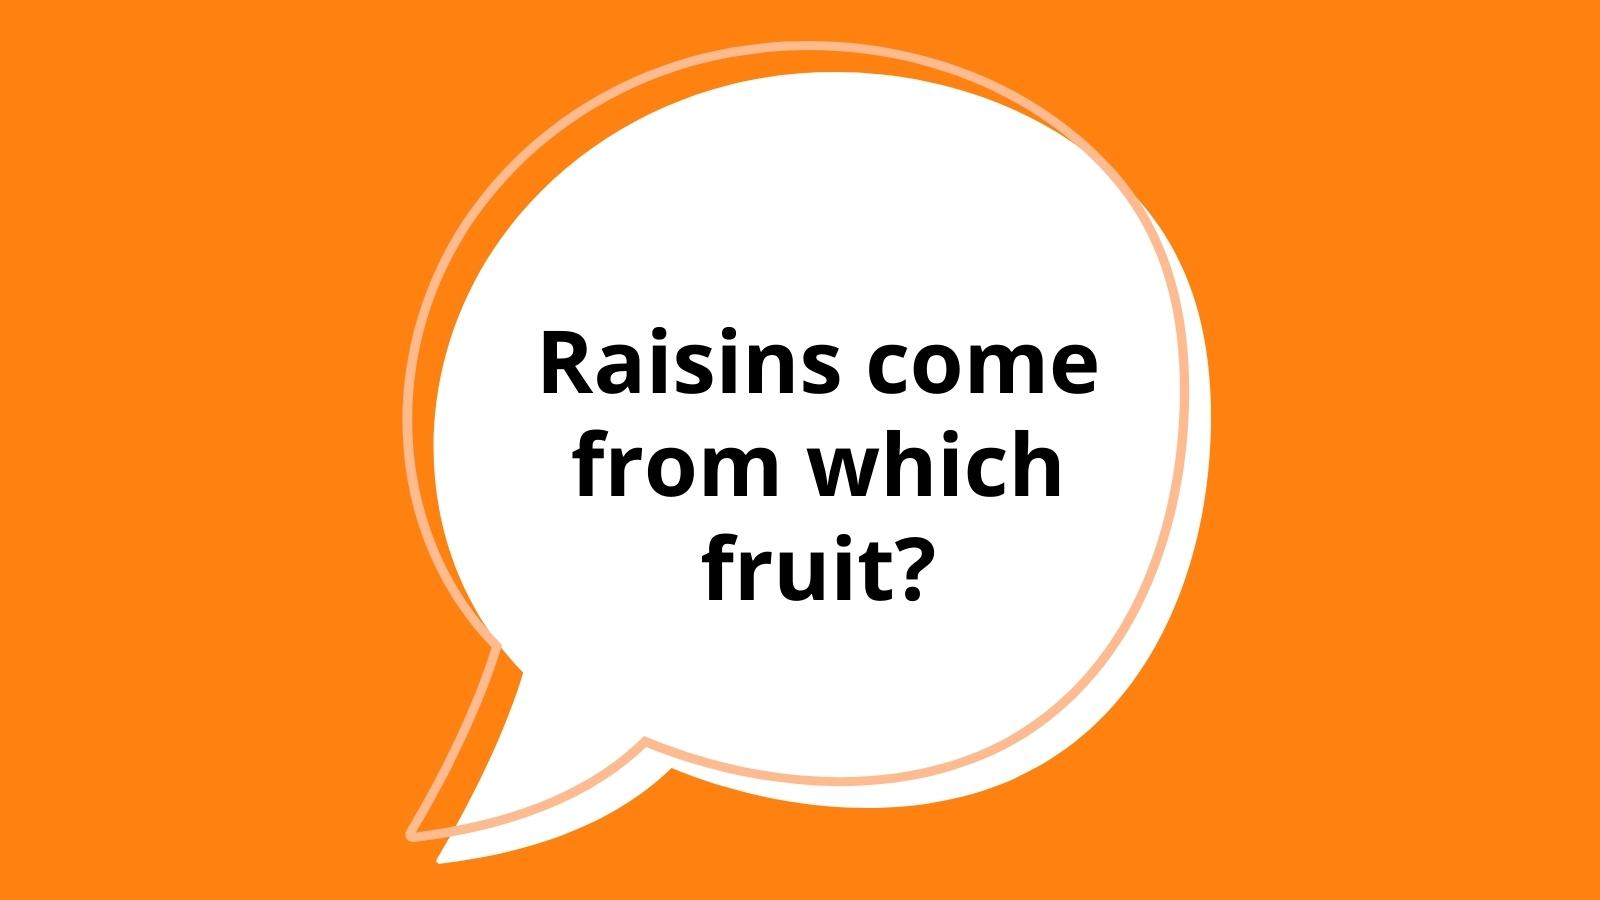 Raisins come from which fruit?